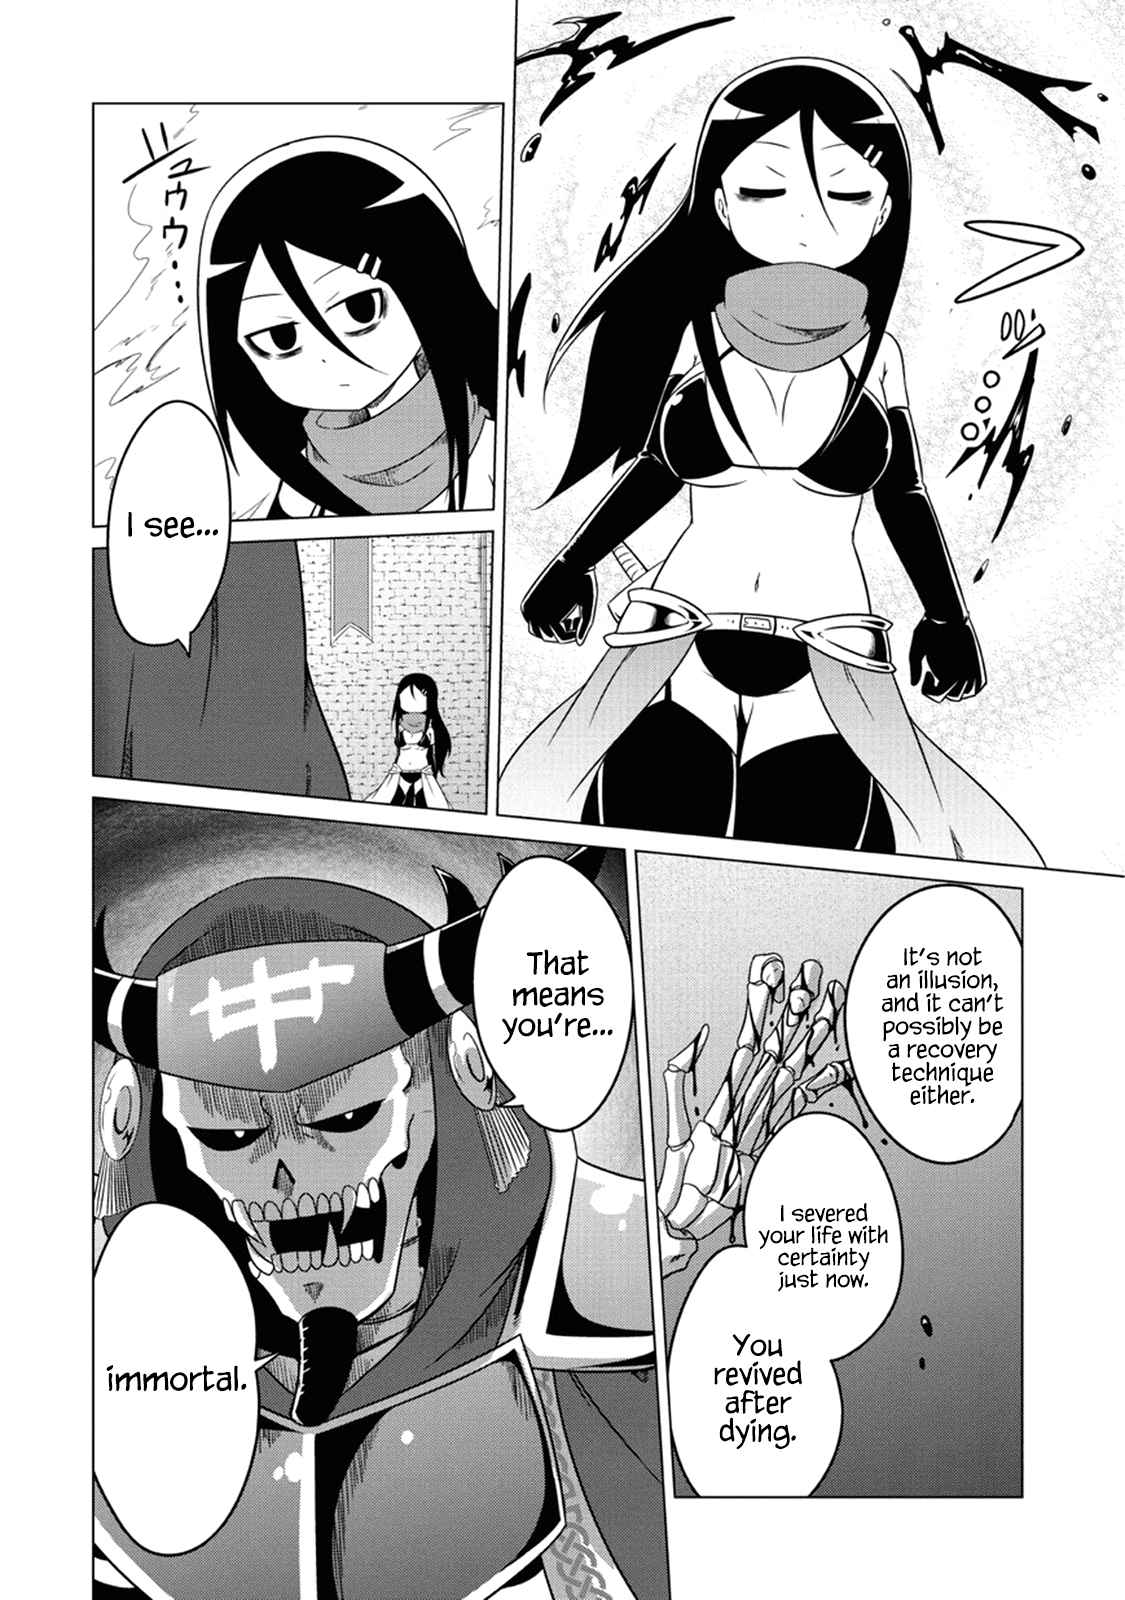 The Devil is Troubled by the Suicidal Heroine Vol. 1 Ch. 1